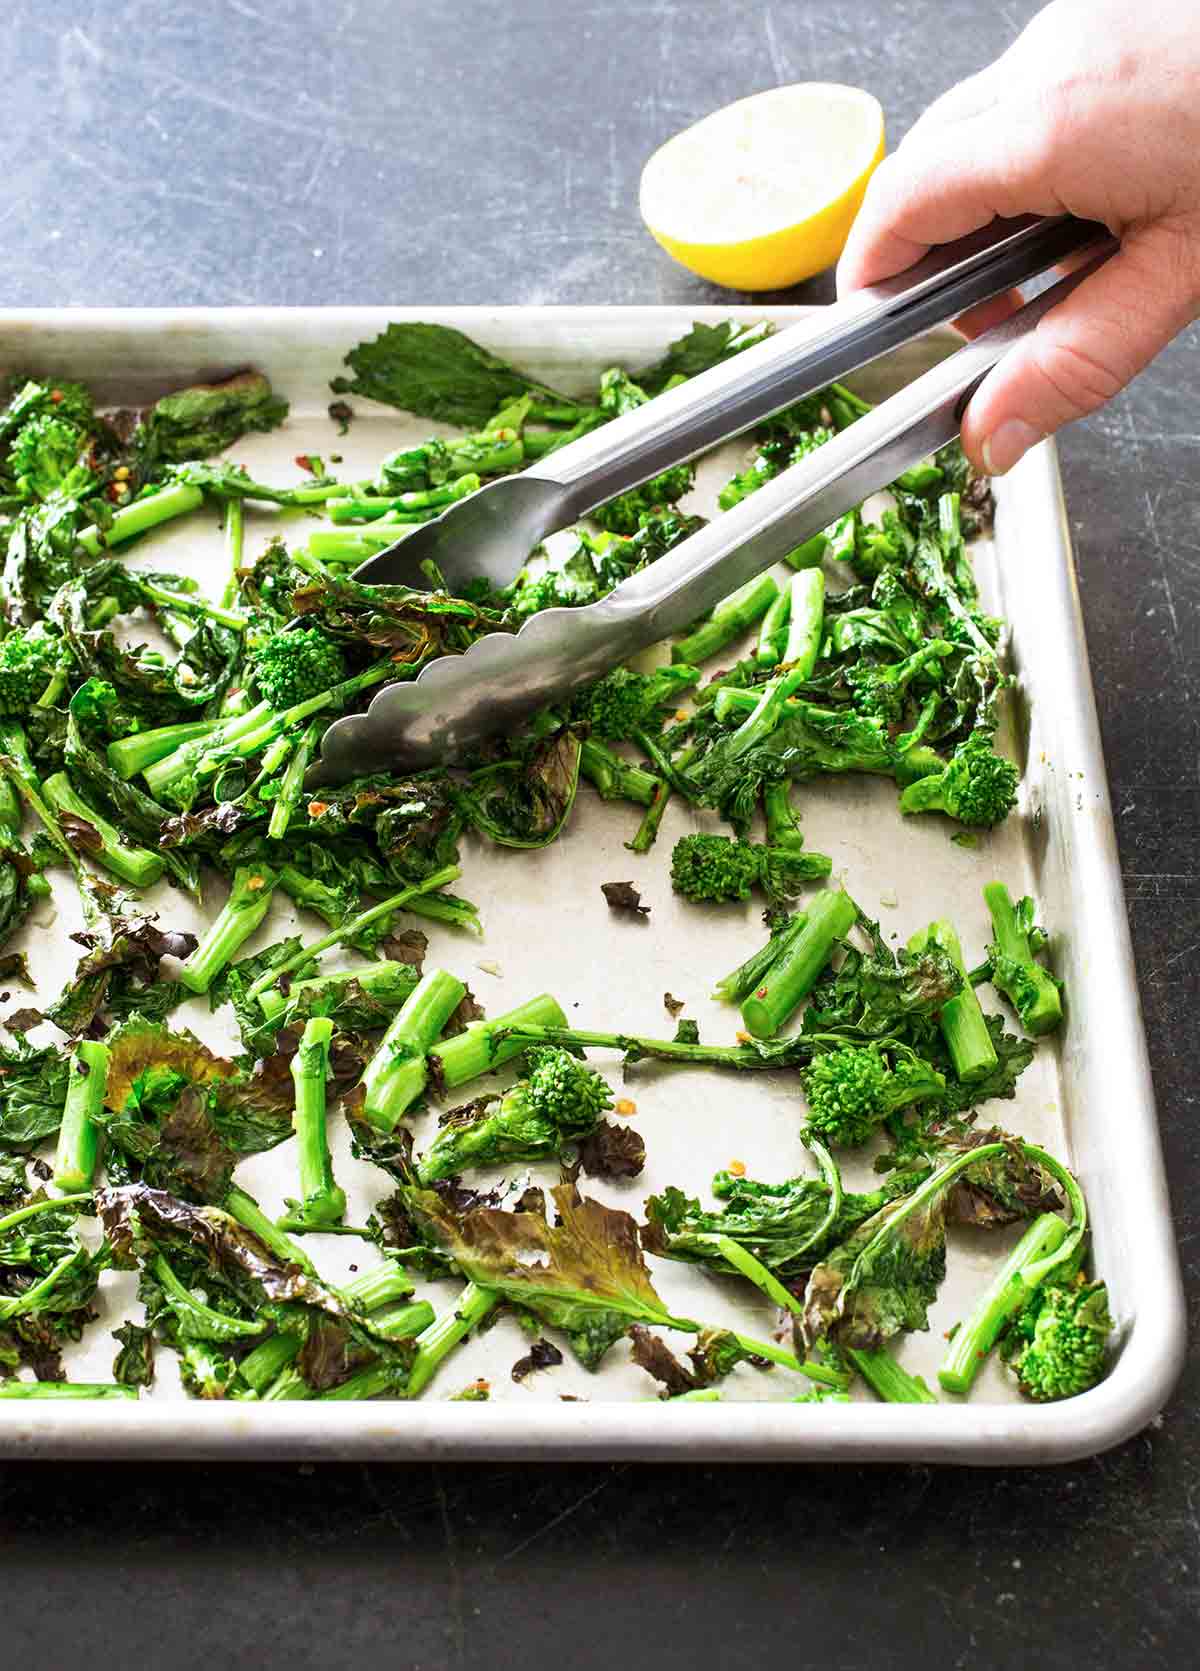 Pieces of broiled broccoli rabe being turned over on a sheet pan by a person using tongs.